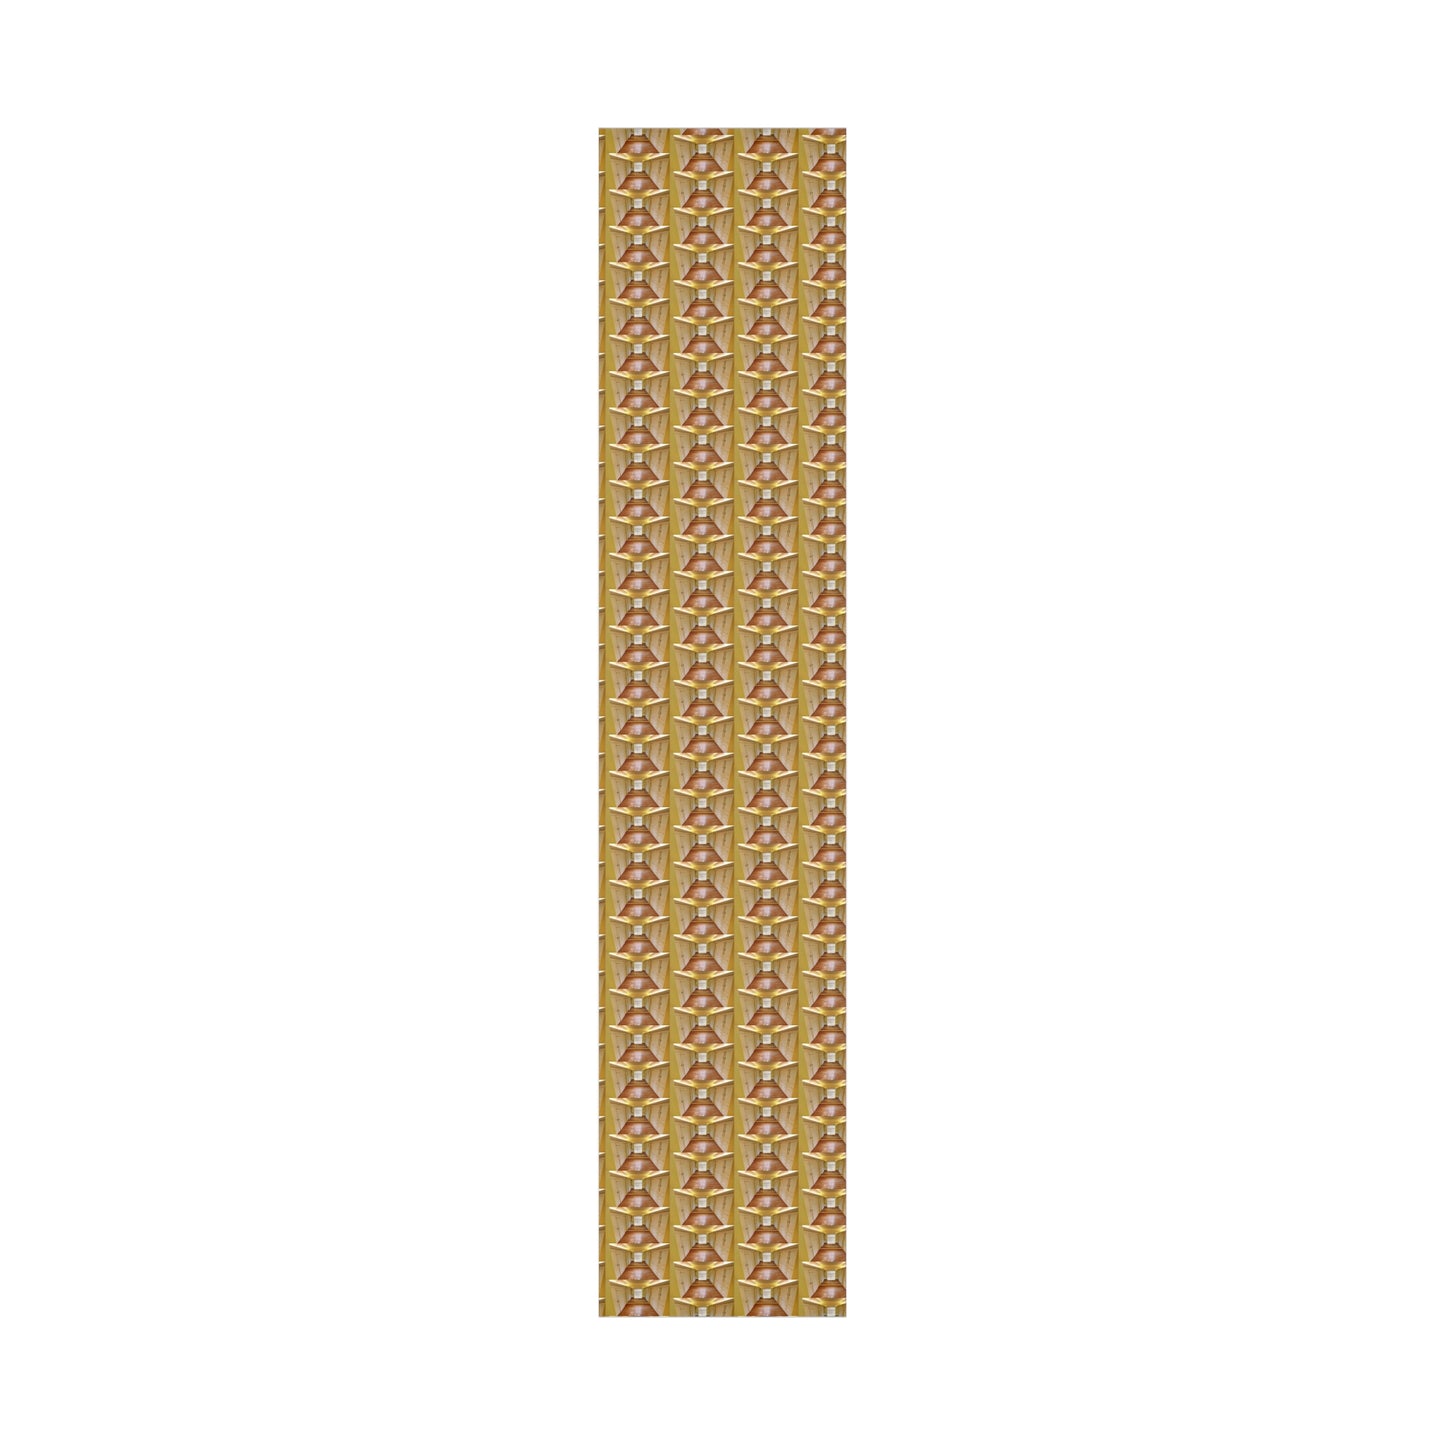 2200 S Main inspired GOLD Gift Wrap